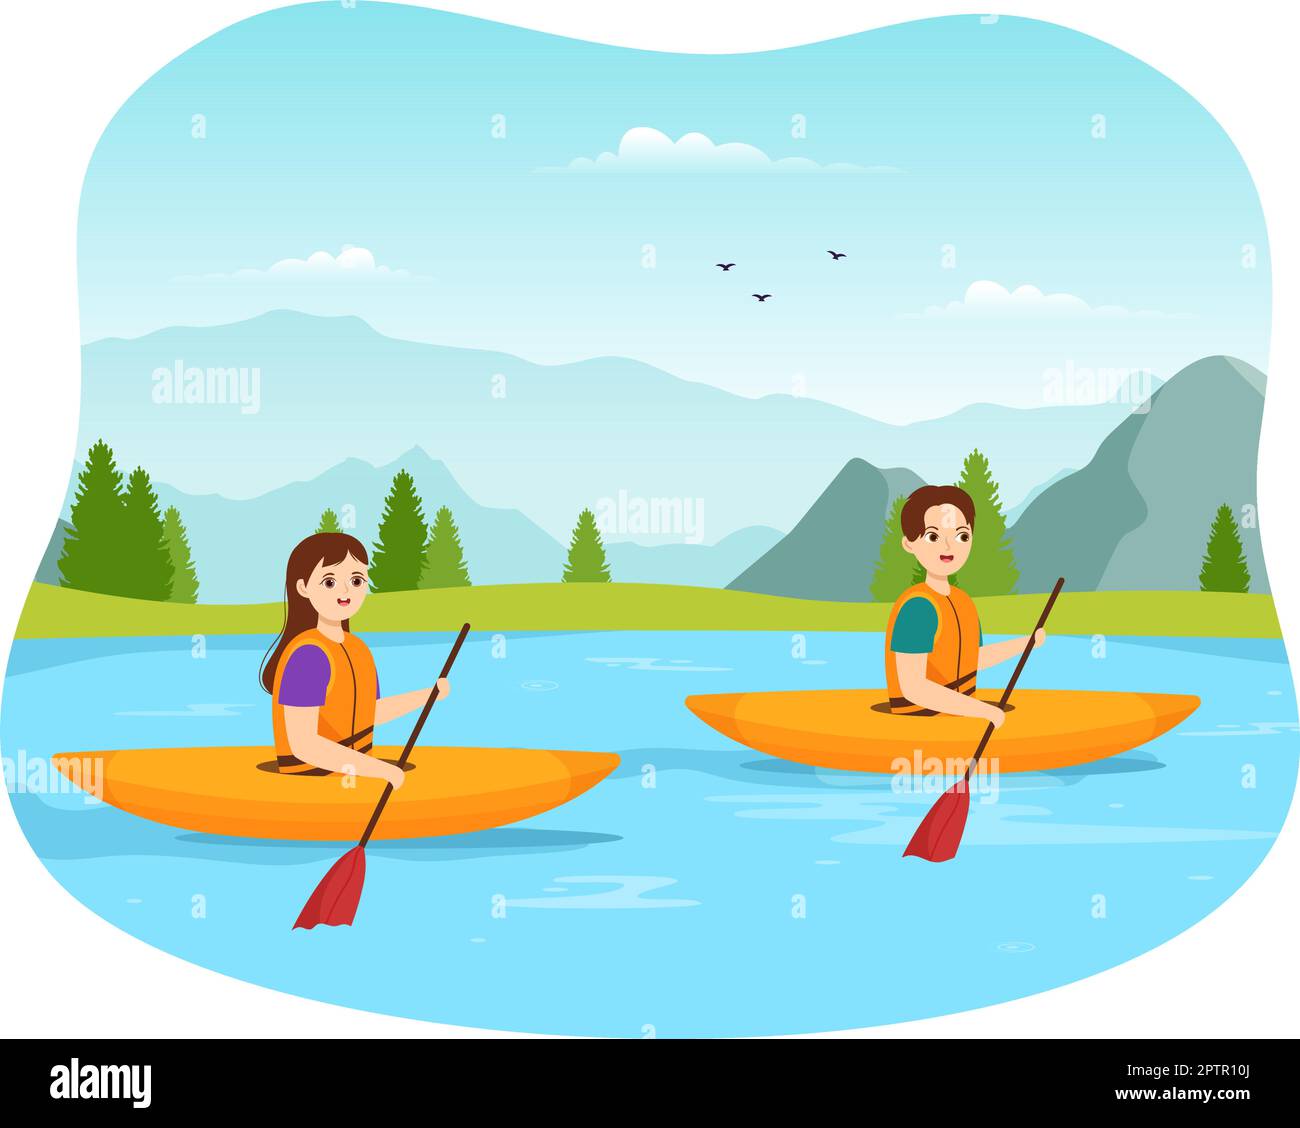 People Enjoying Rowing Illustration with Canoe and Sailing on River or Lake  in Active Water Sports Flat Cartoon Hand Drawn Template Stock Vector